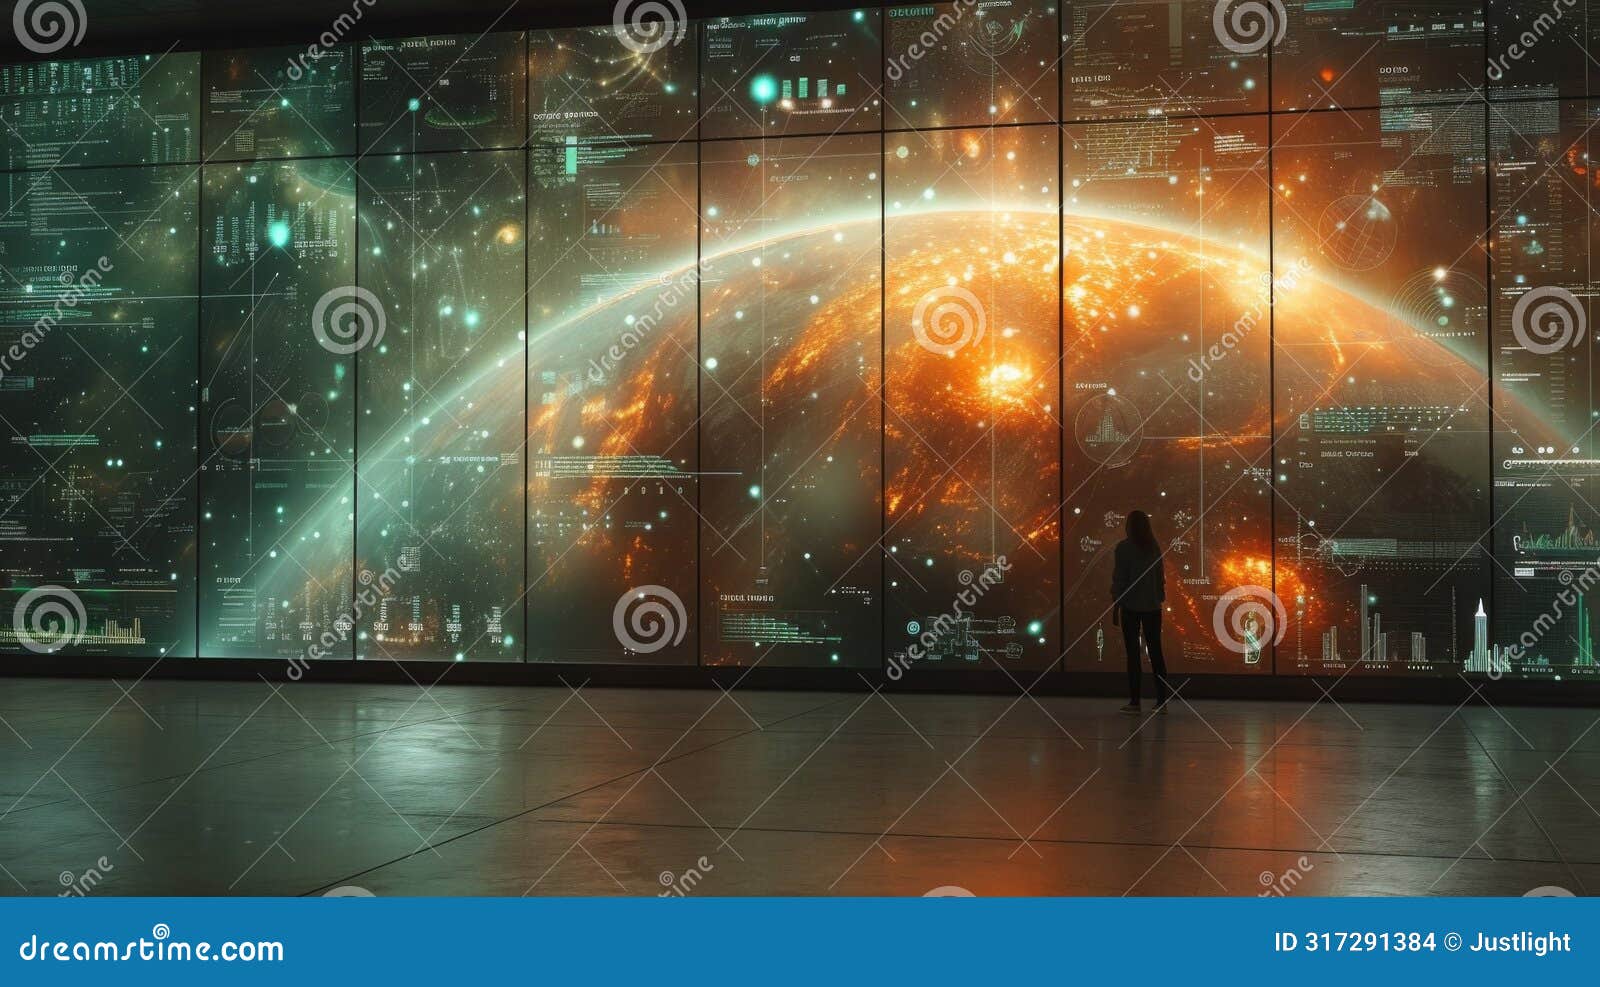 a lone figure stands in front of a massive virtual landscape surrounded by swirling data and graphs projected in